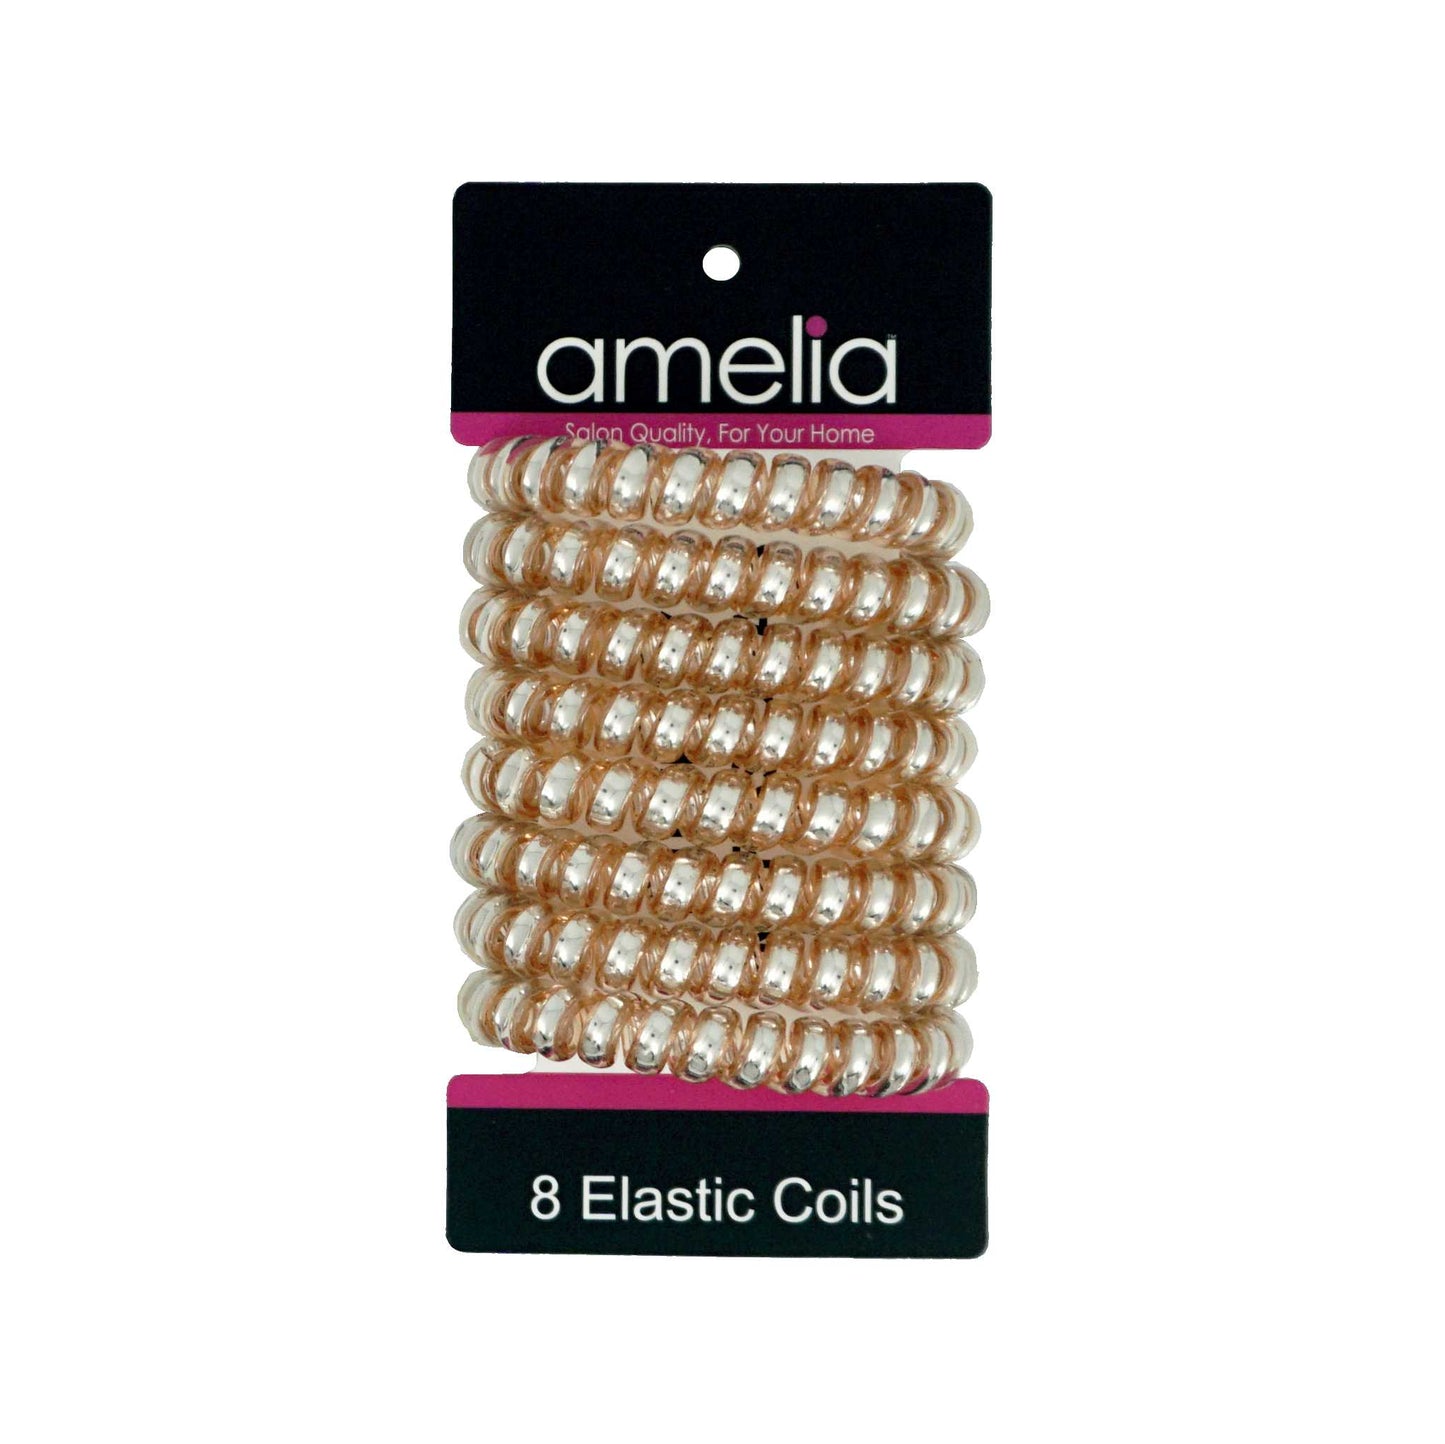 Amelia Beauty Products 8 Large Smooth Shiny Center Elastic Hair Coils, 2. 5in Diameter Thick Spiral Hair Ties, Gentle on Hair, Strong Hold and Minimizes Dents and Creases, Gold